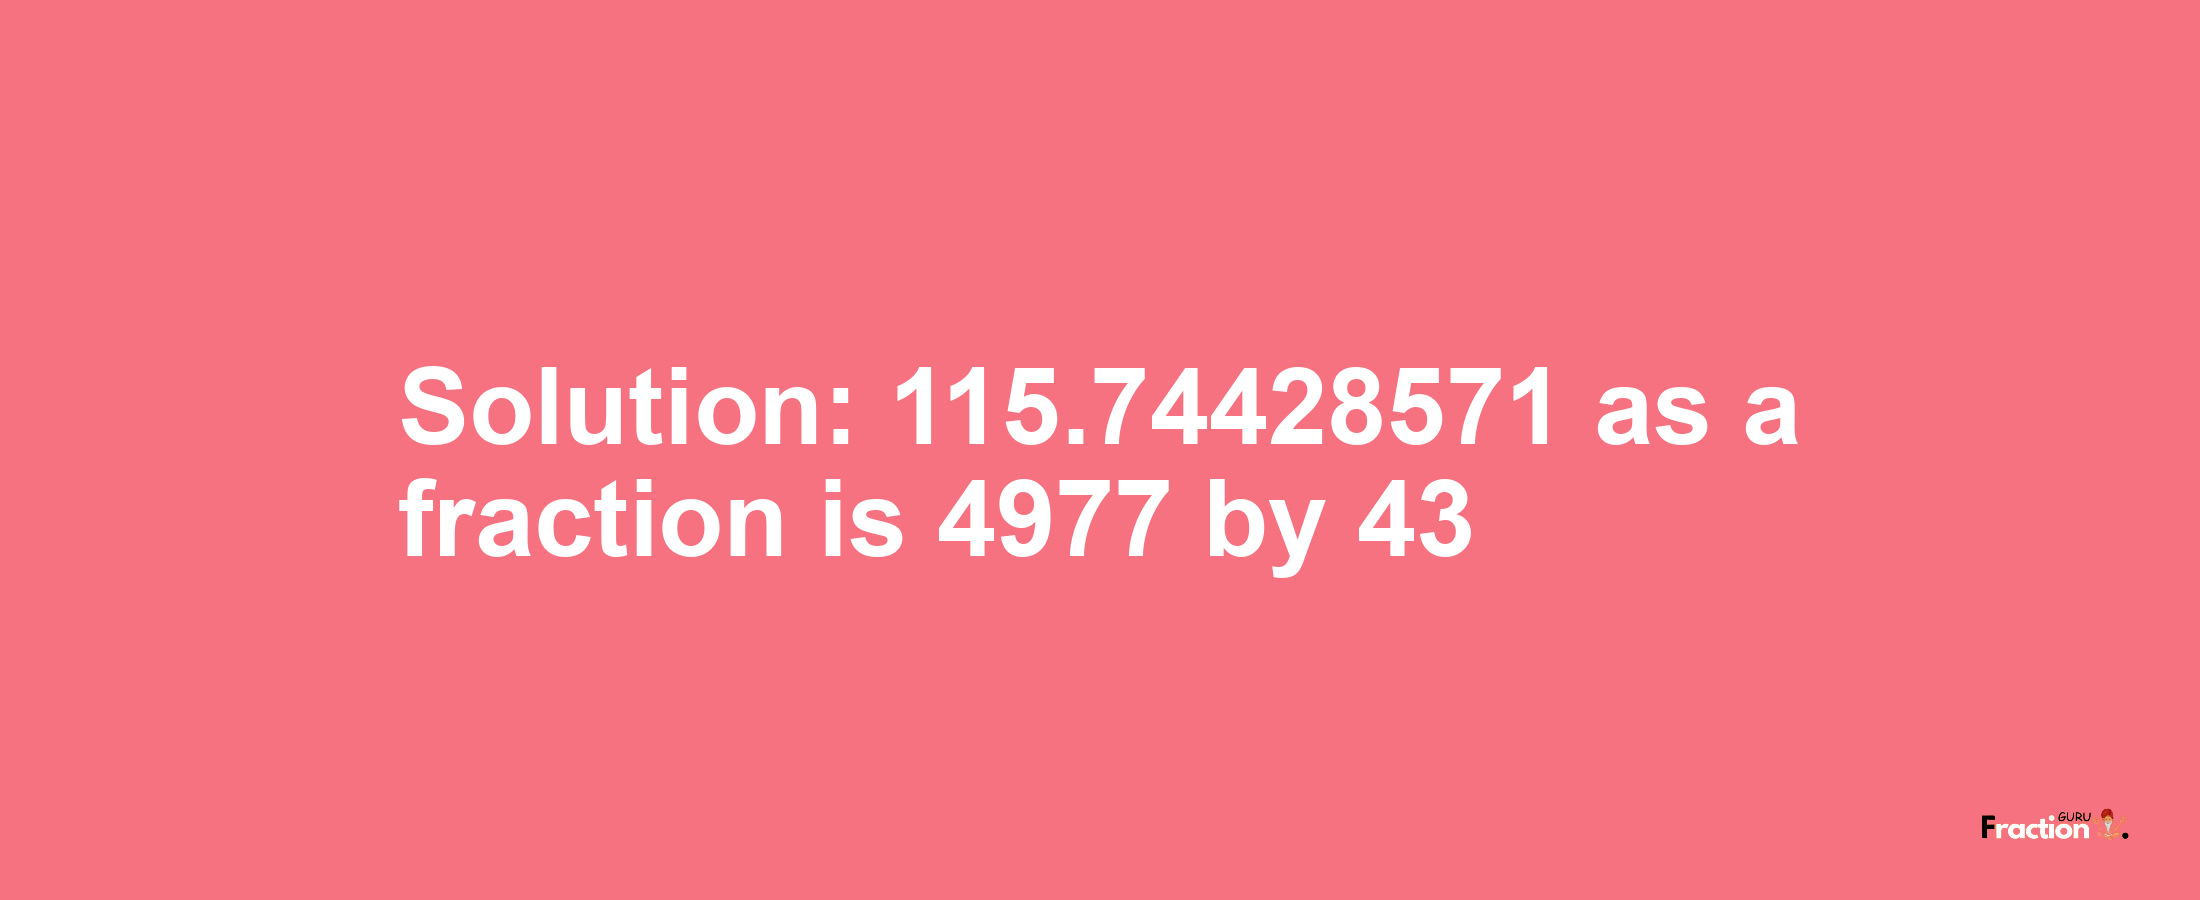 Solution:115.74428571 as a fraction is 4977/43